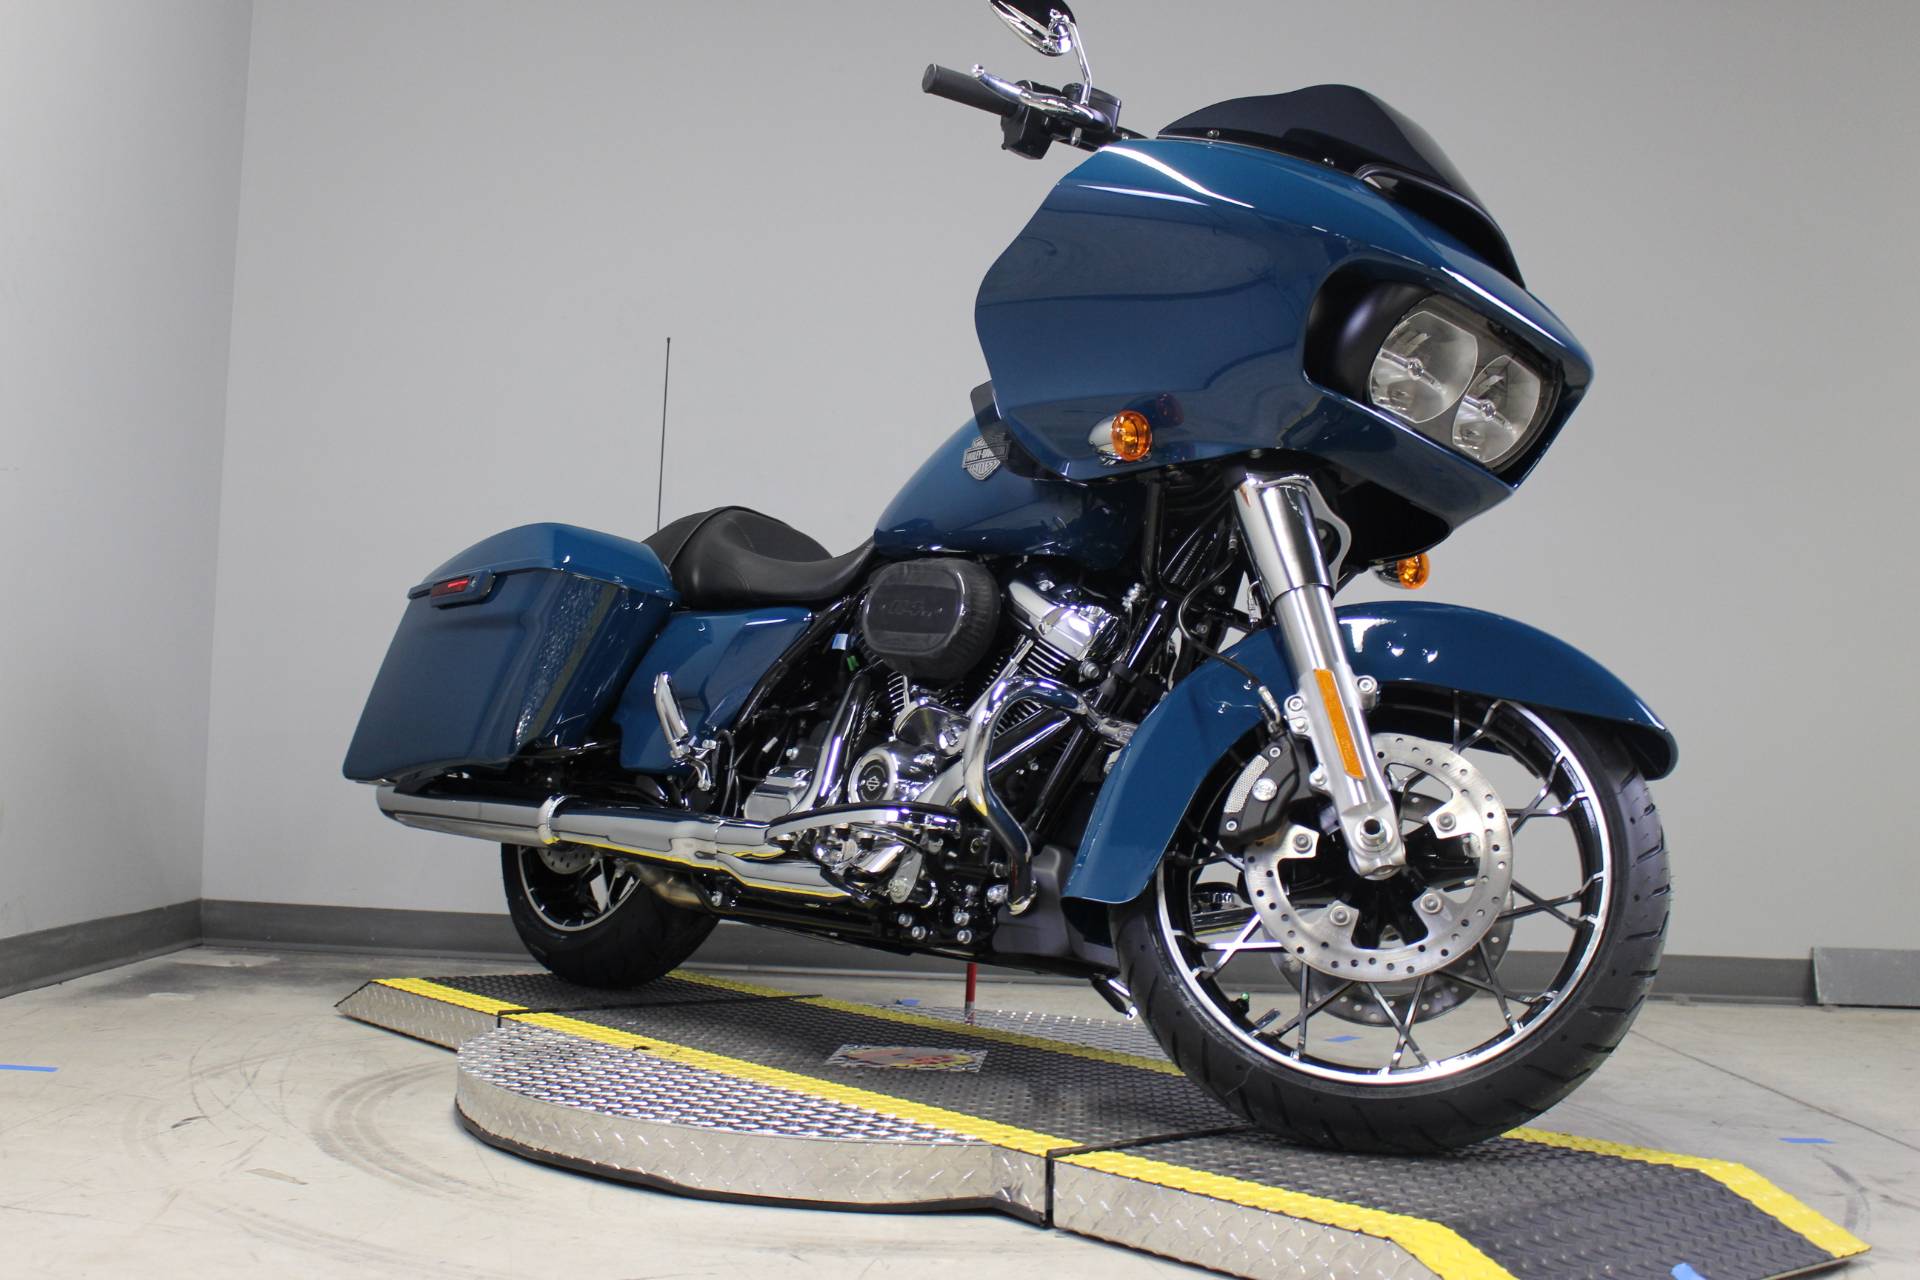 New 2021 Harley Davidson Road Glide Special Billiard Teal Chrome Option Motorcycles In Coralville Ia 605696